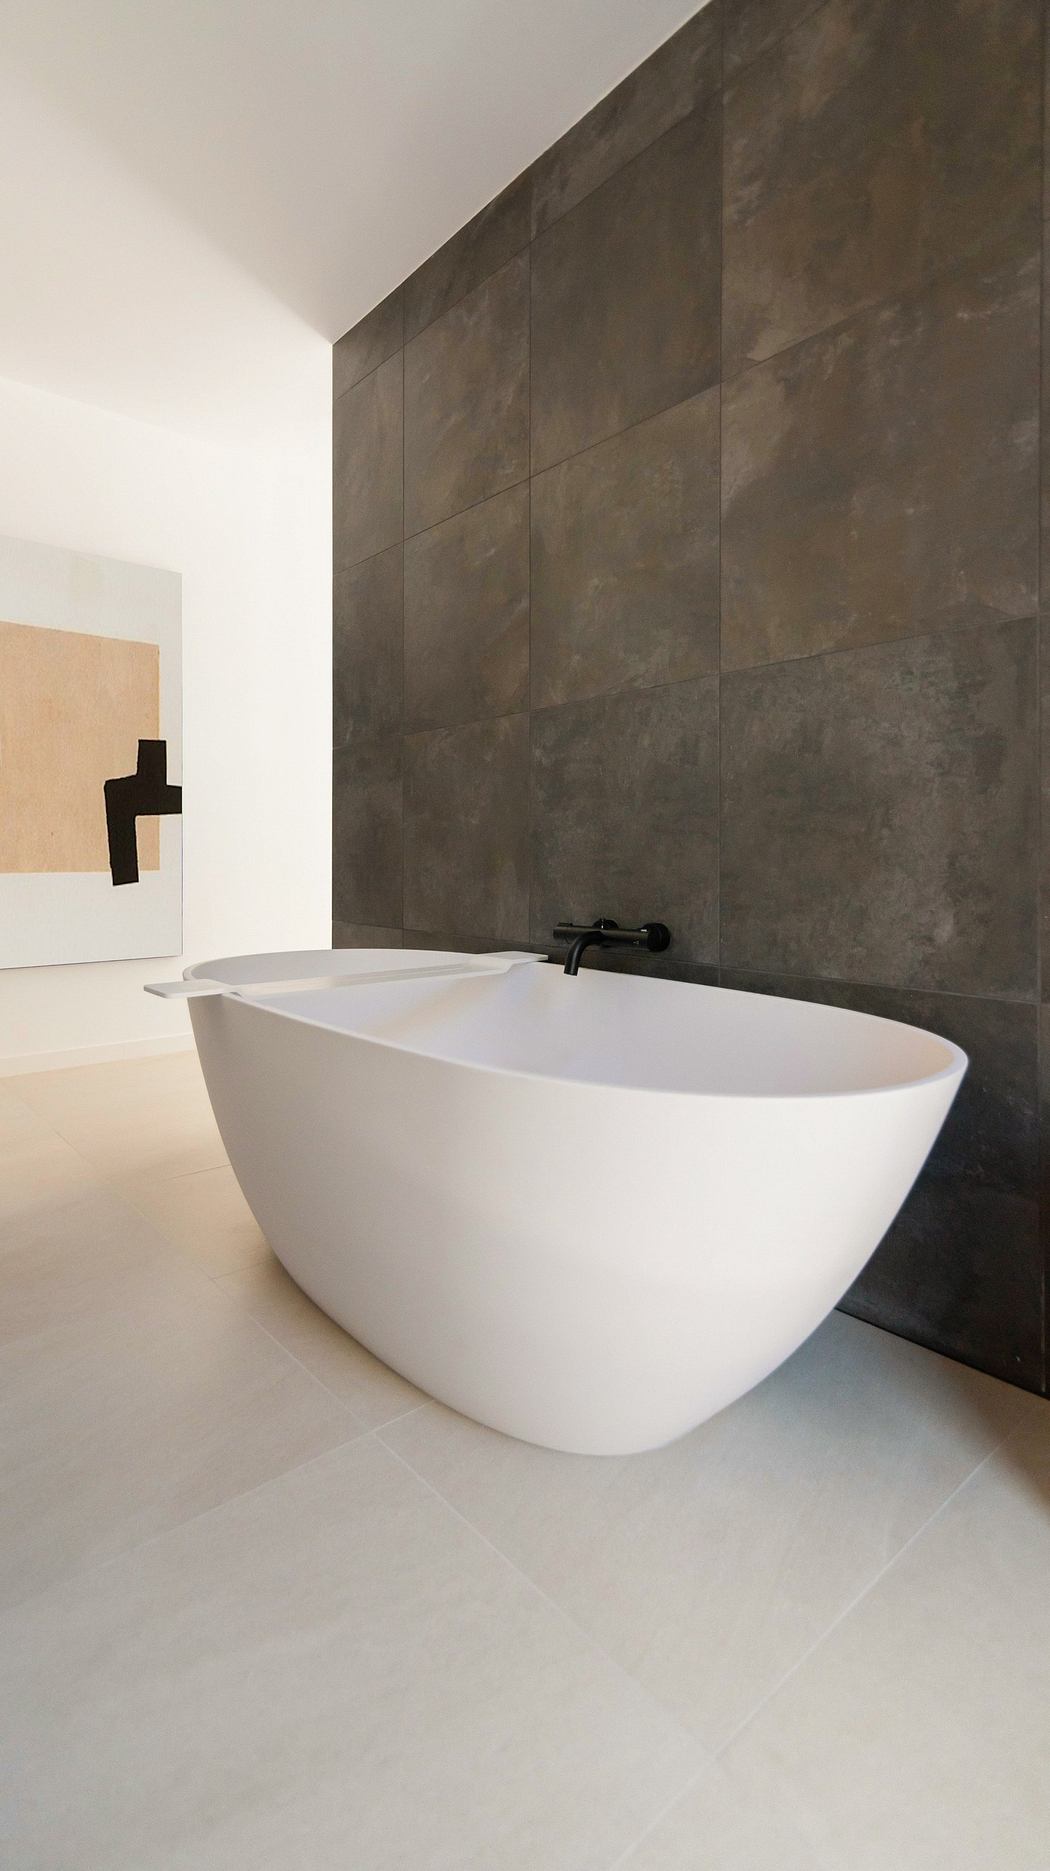 A modern bathroom with a freestanding white tub against a large dark tiled wall